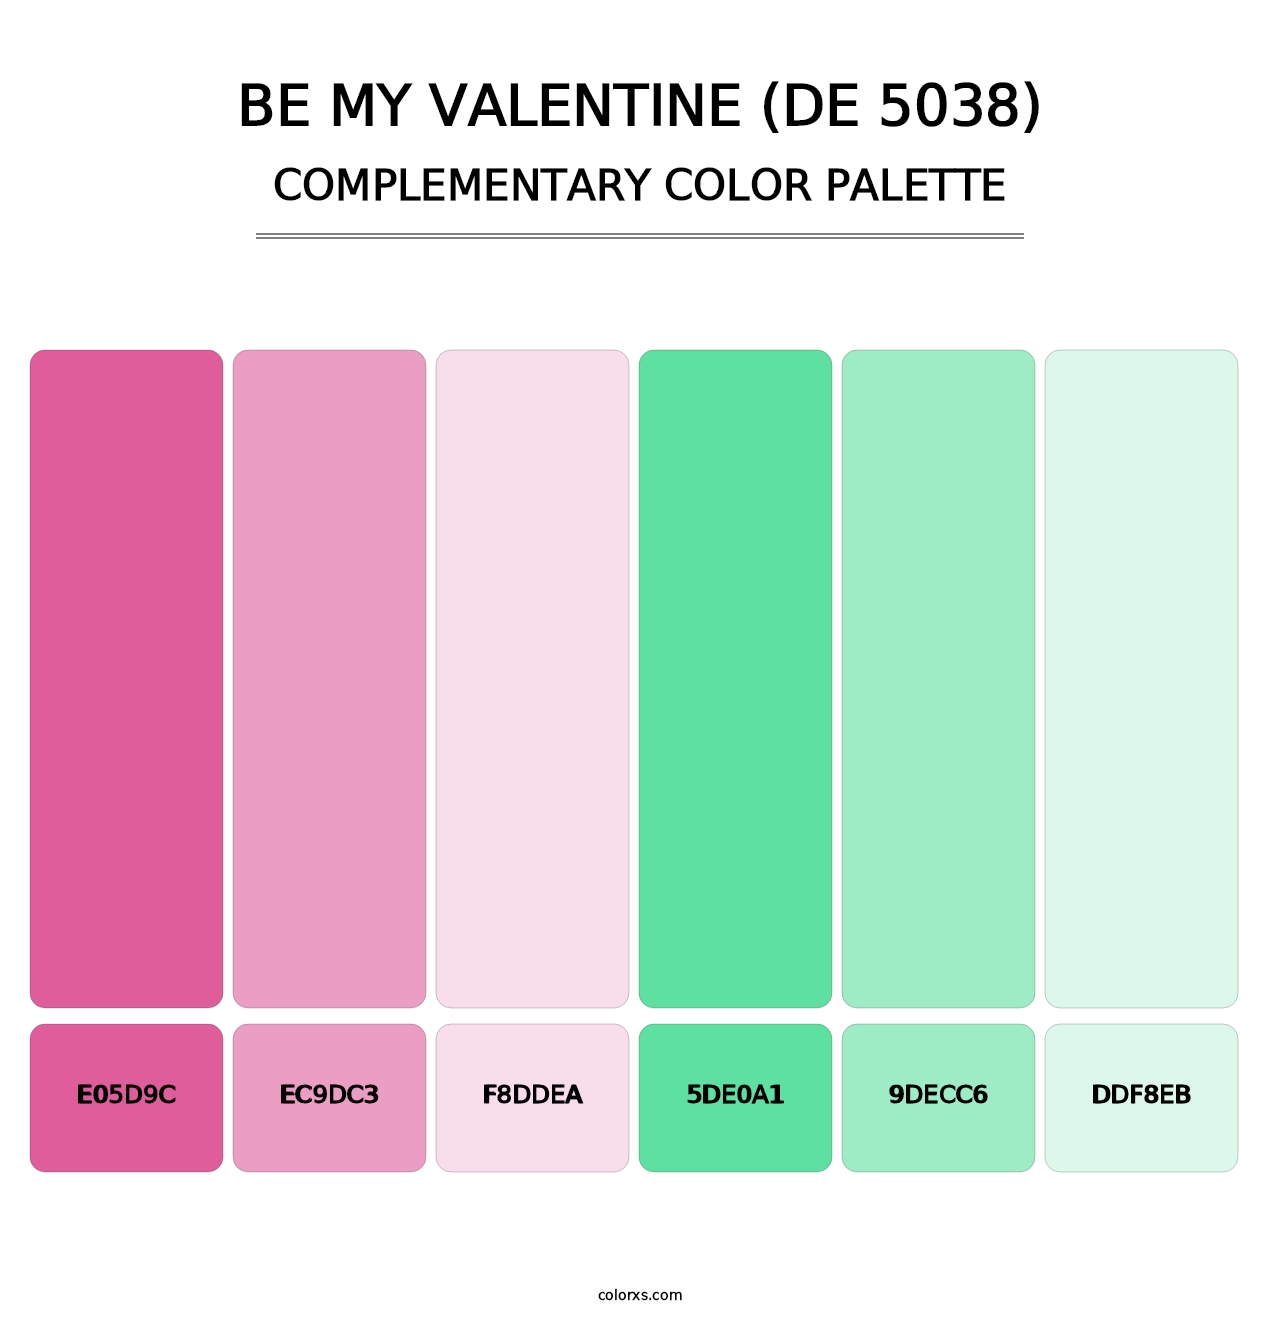 Be My Valentine (DE 5038) - Complementary Color Palette